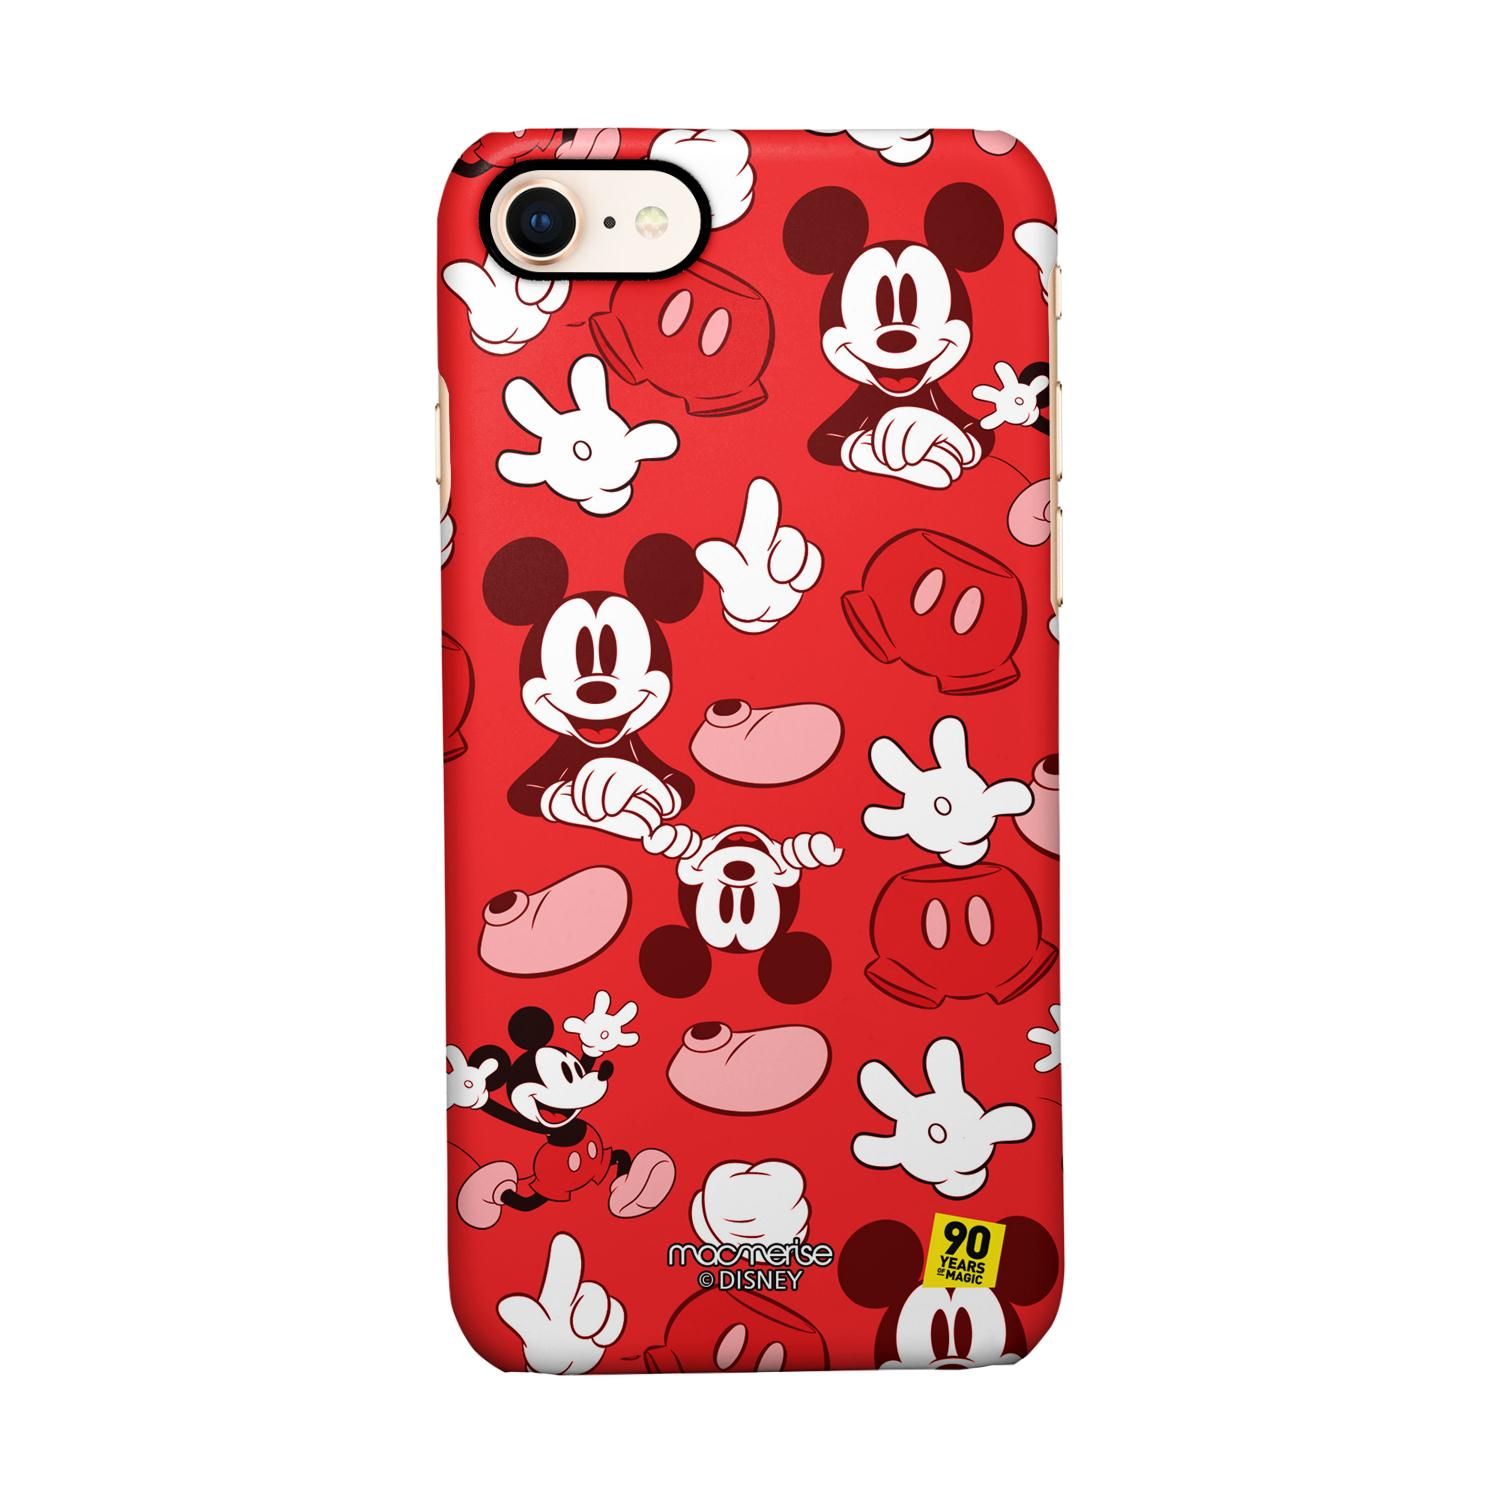 Buy Mickey classic Red - Sleek Phone Case for iPhone 7 Online